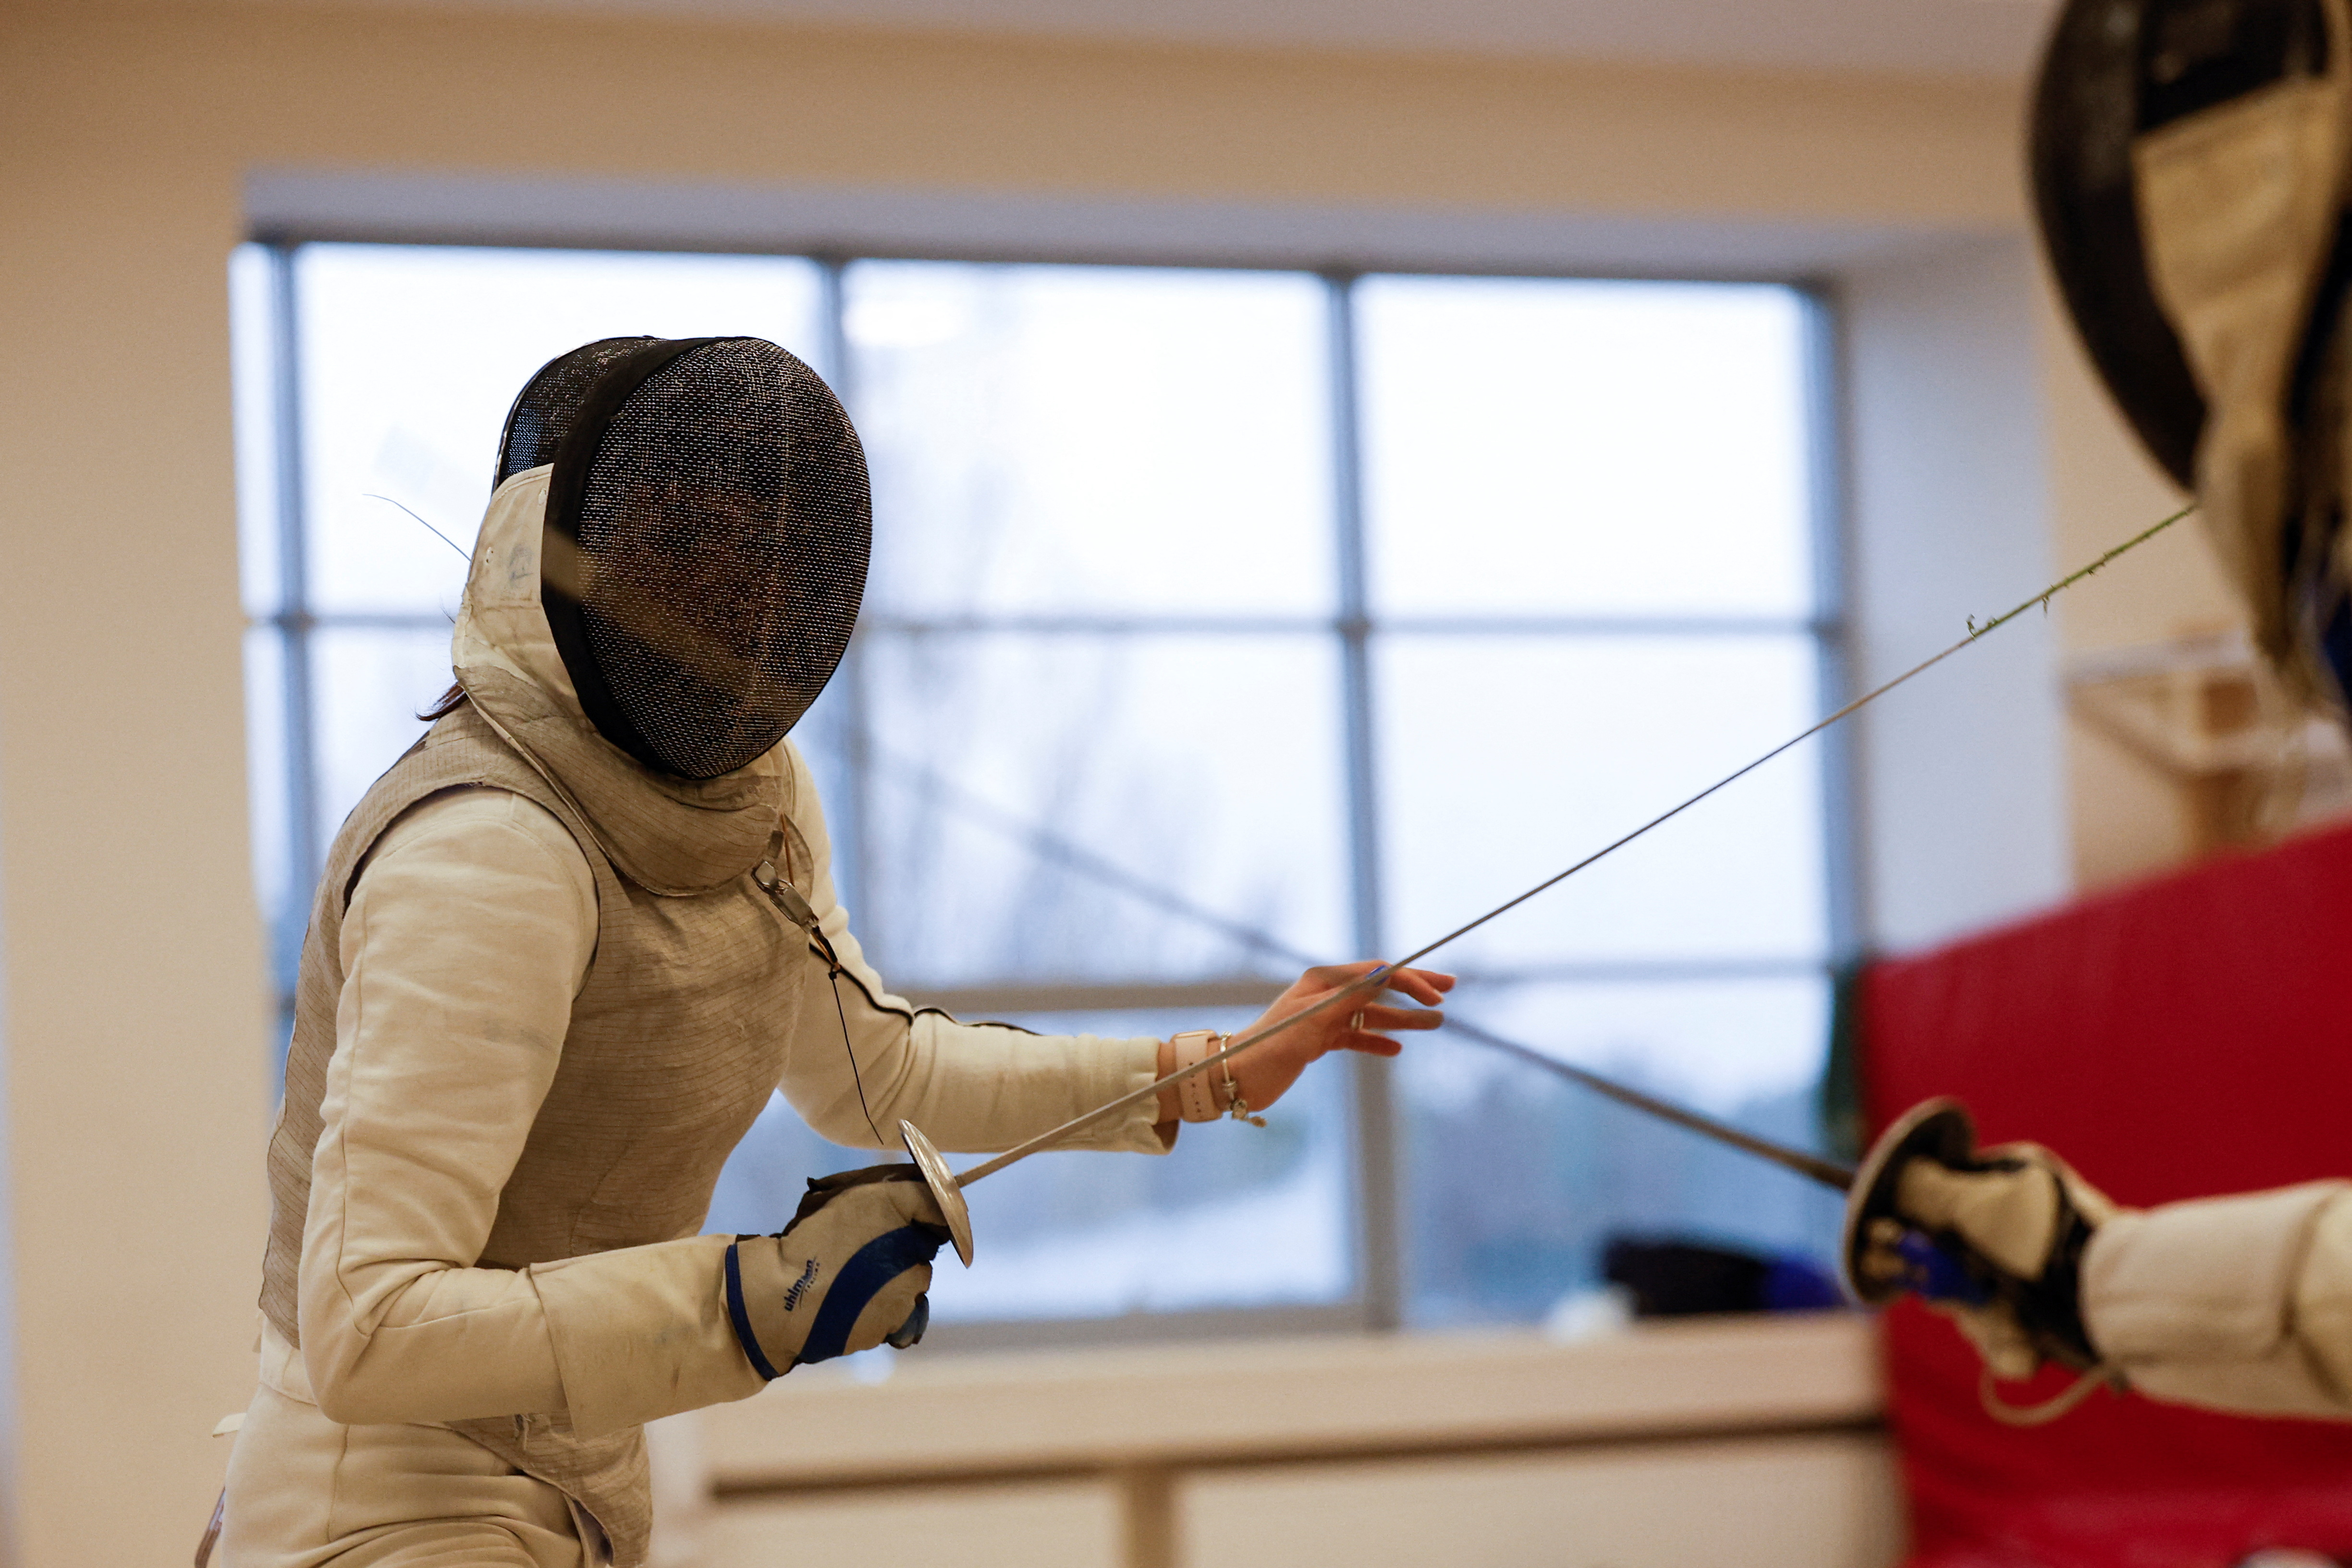 Member of Ukraine's fencing team Poloziuk attends a training session at the Olympic training base in Kyiv